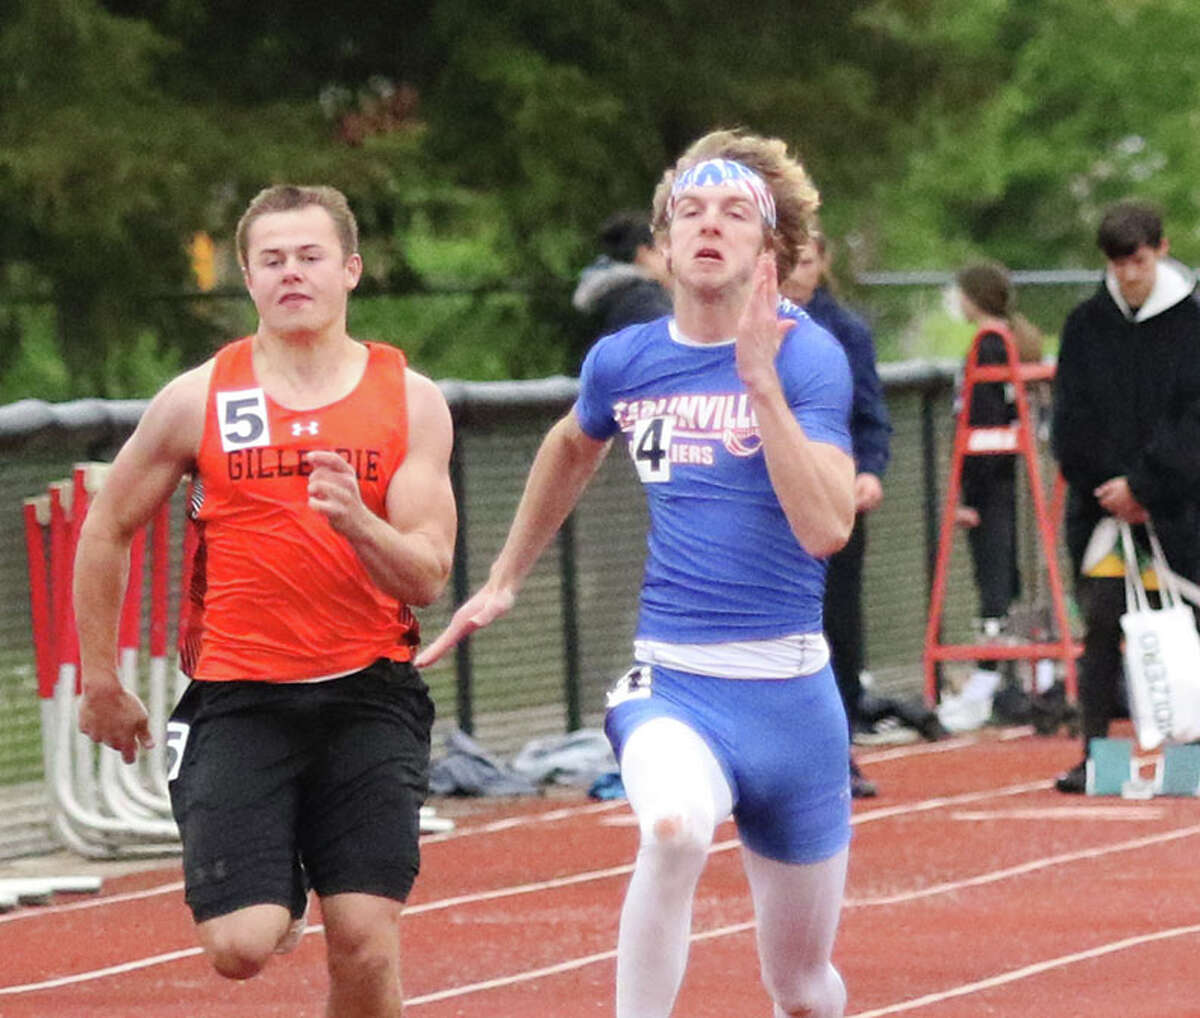 Carlinville's Ethen Siglock (right), shown running with Gillespie's Ronnie Monke in the 100 at the SCC Meet earlier this season, ran in four events Thursday at the Class 1A state meet prelims and advanced to Saturday's finals in the 200 meters.